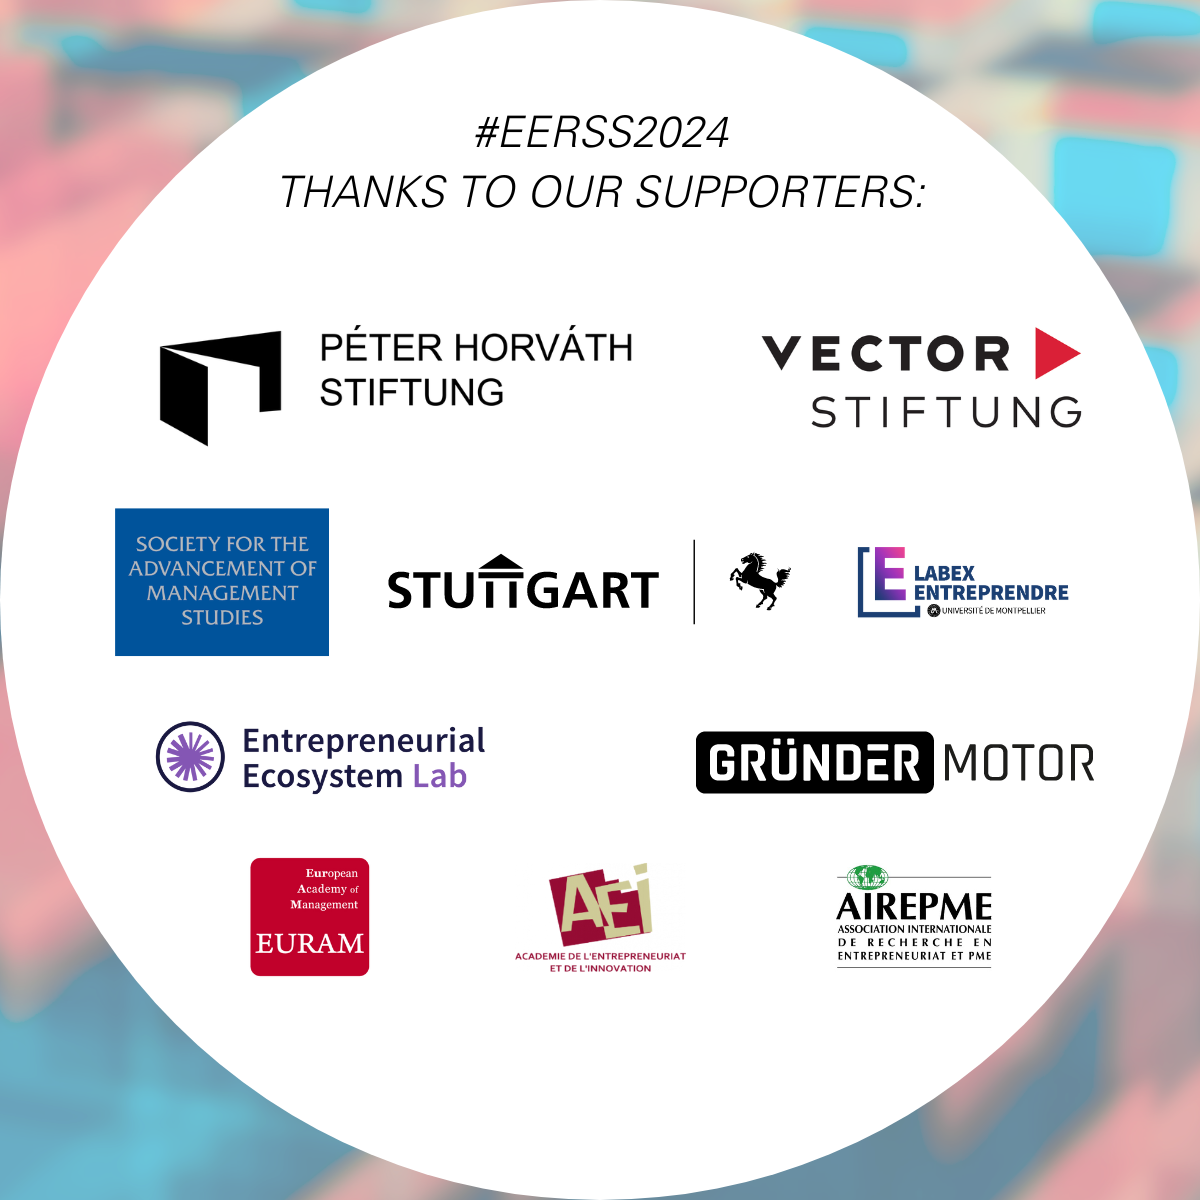 #EERSS2024 is possible thanks to the support of  the Society for the Advancement of Management Studies, the Péter Horváth Foundation, Vector Foundation, Entrepreneurial Ecosystem Lab, Labex Entreprendre, Stadt Stuttgart, Gründermotor, as well as the EURAM, AEI and AIREPME. 